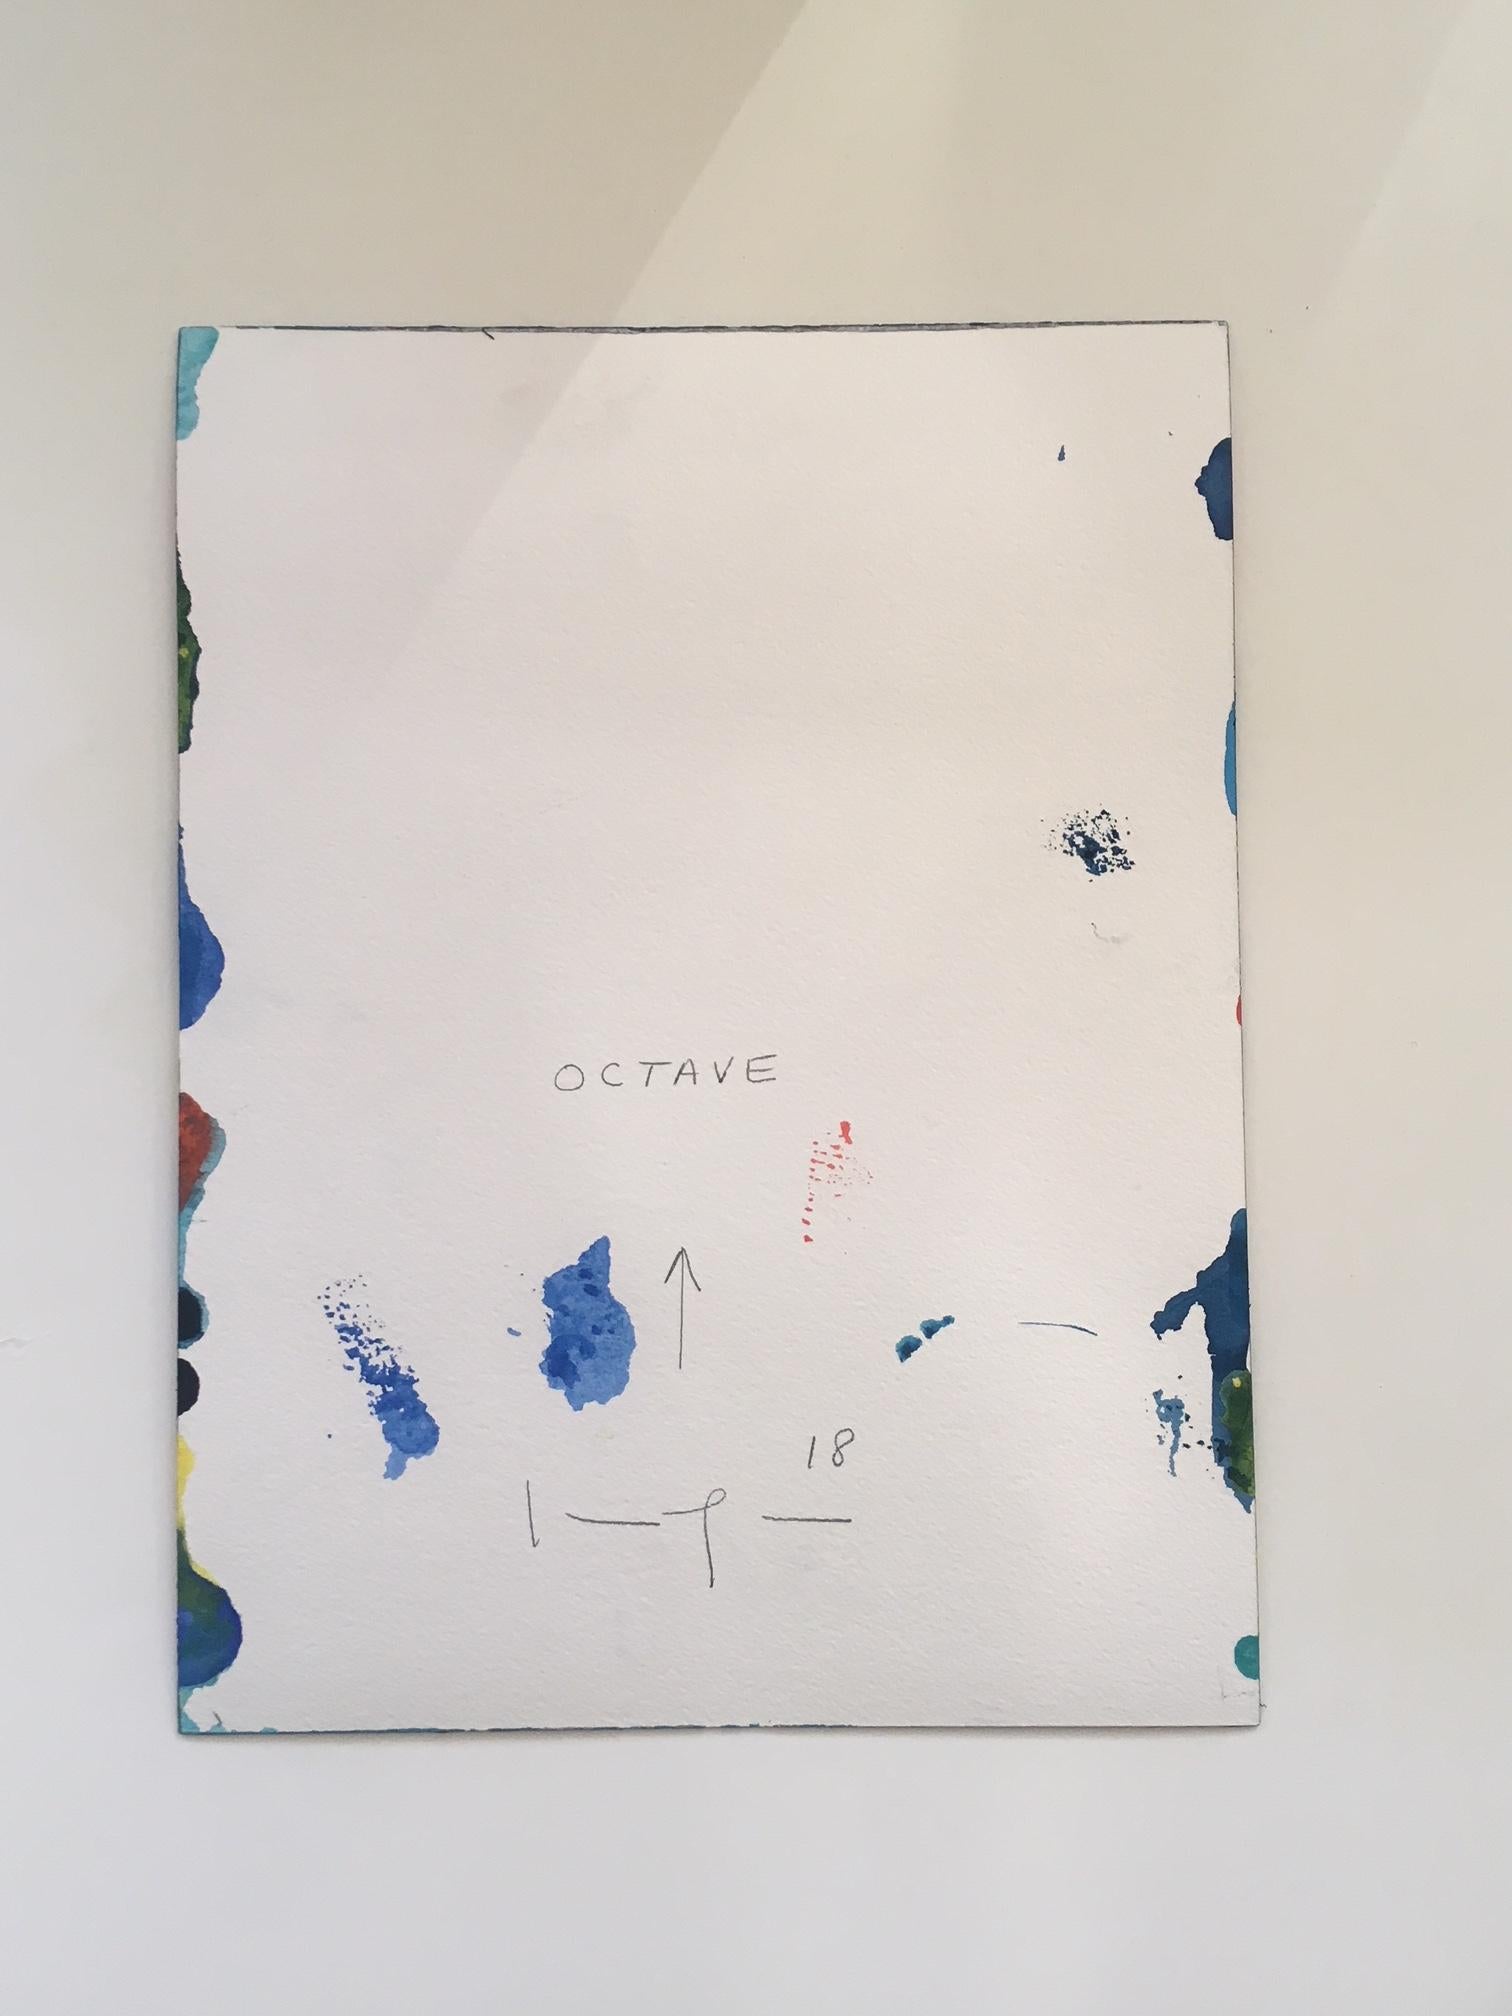 Octave (Abstract drawing)

Watercolour on Arches paper - Unframed 

Uchiyama works with watercolor on Arches paper. She often develops as many as eight compositions at one time, moving on to the next while the paint dries on the last. To begin each